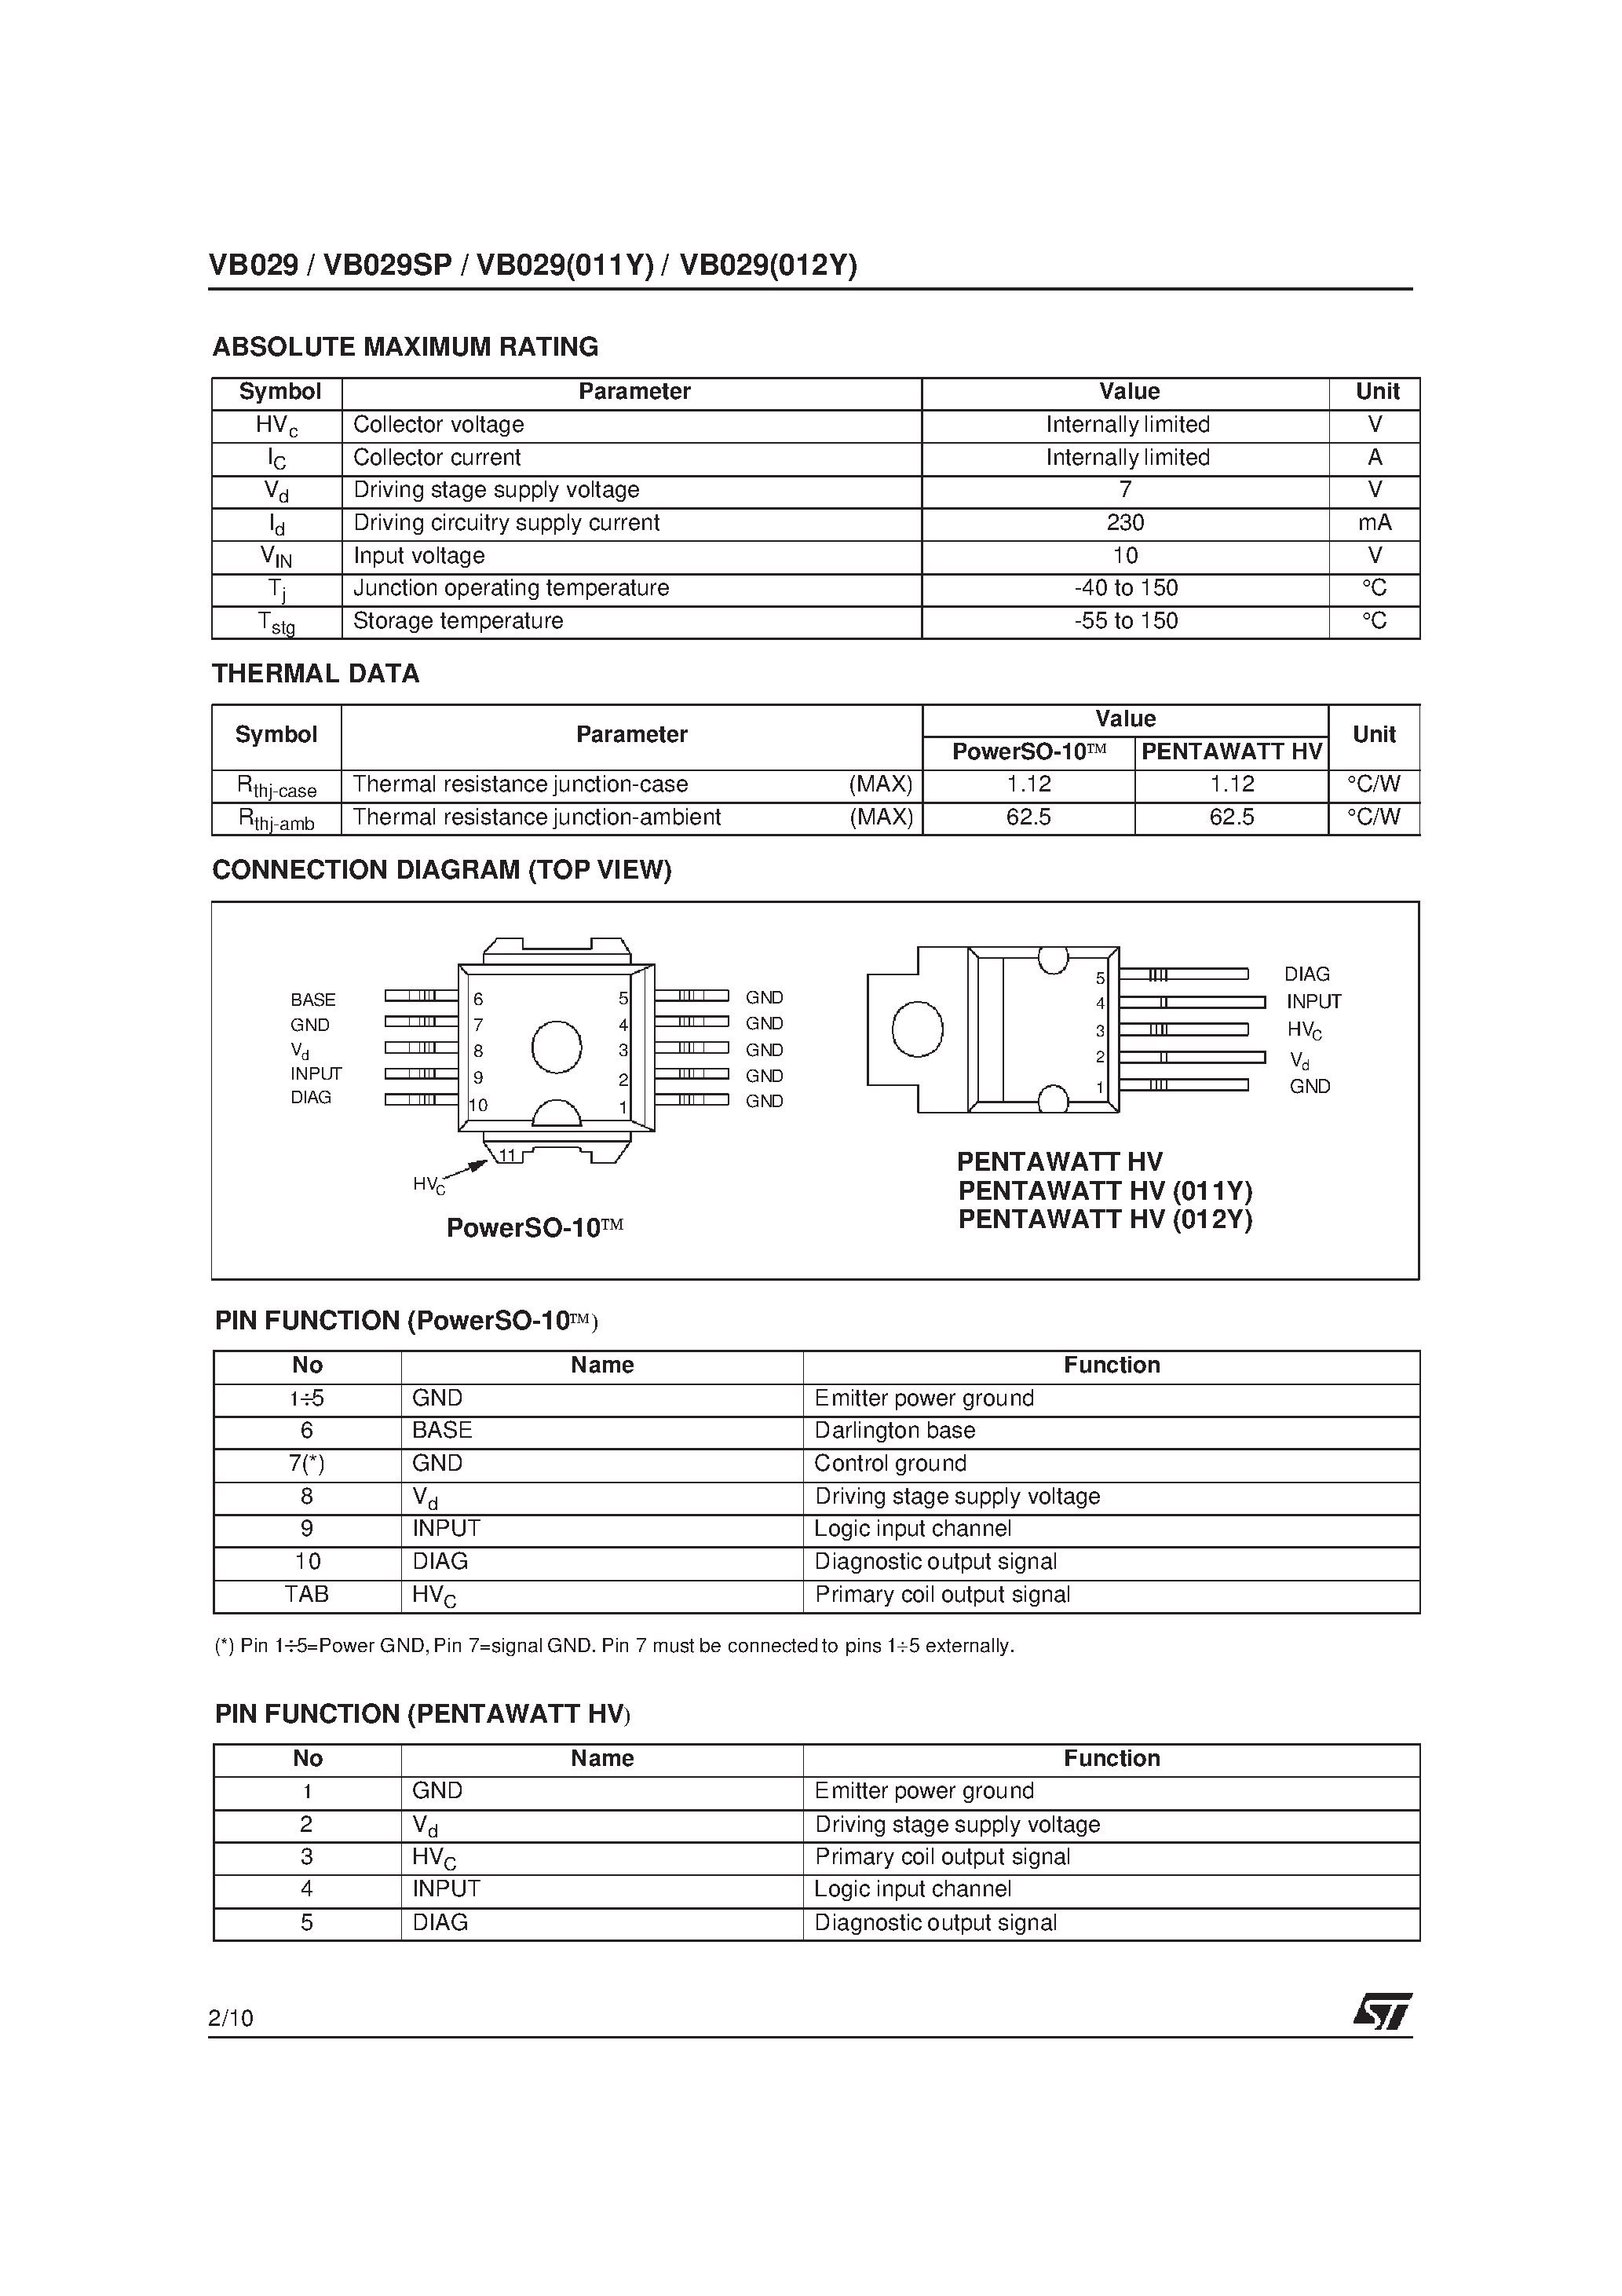 Datasheet VB029(011Y) - HIGH VOLTAGE IGNITION COIL DRIVER POWER I.C. page 2